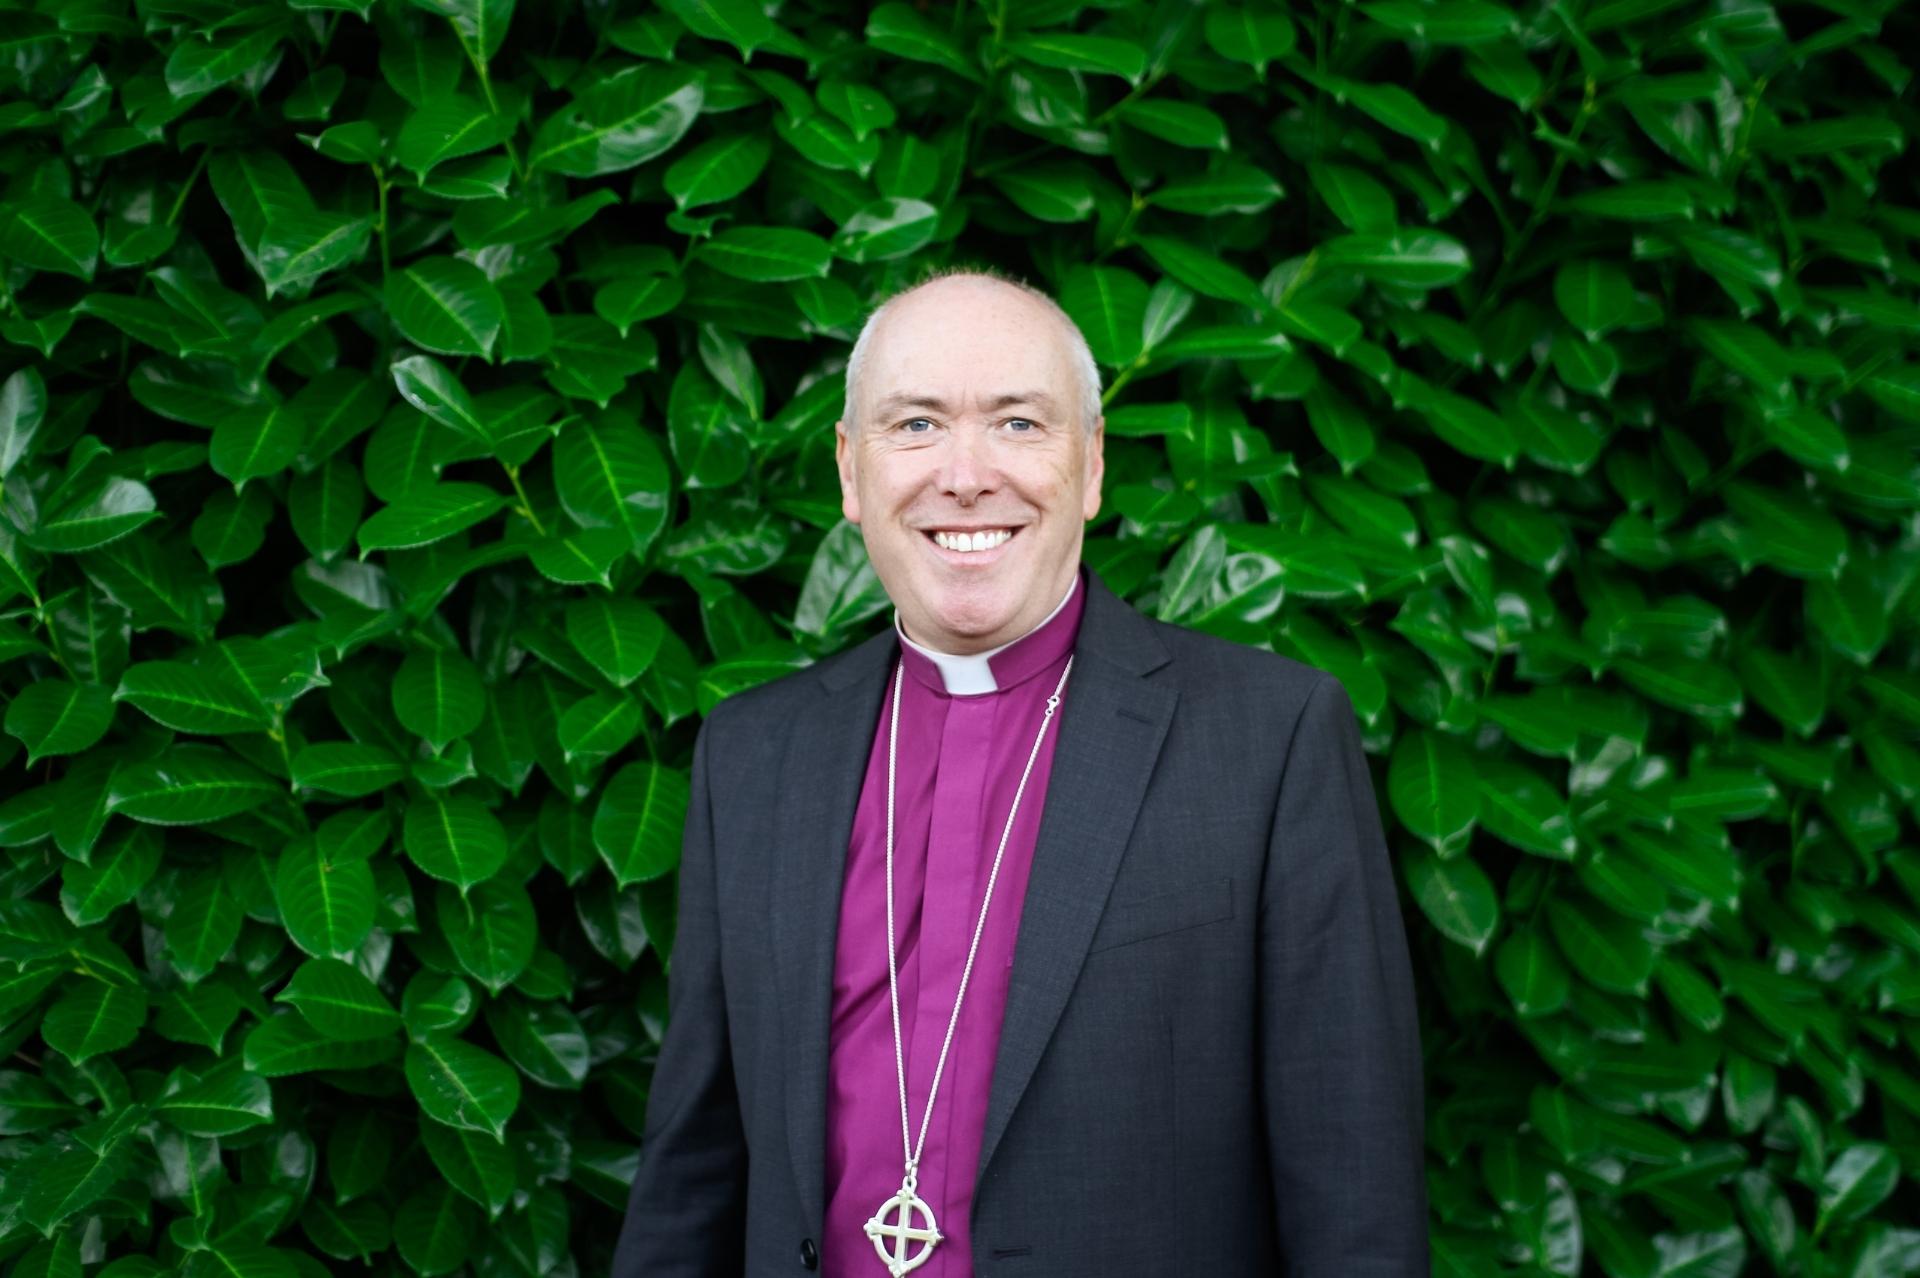 Bishop Paul Davies stood in front of a tall green hedge wearing a purple clerical shirt, silver cross neckless and dark jacket